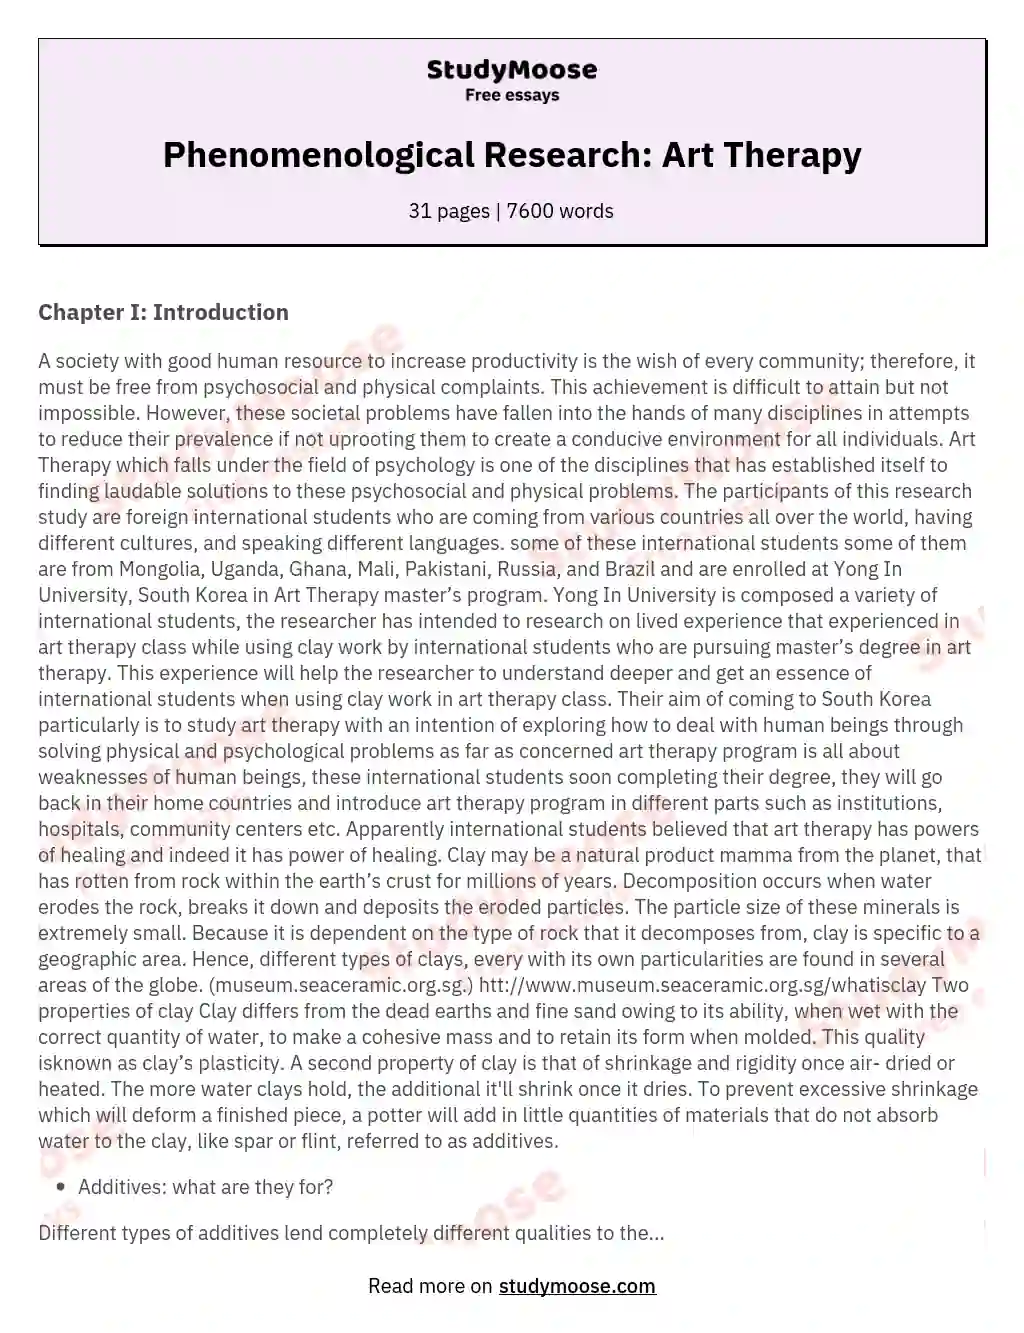 Phenomenological Research: Art Therapy essay